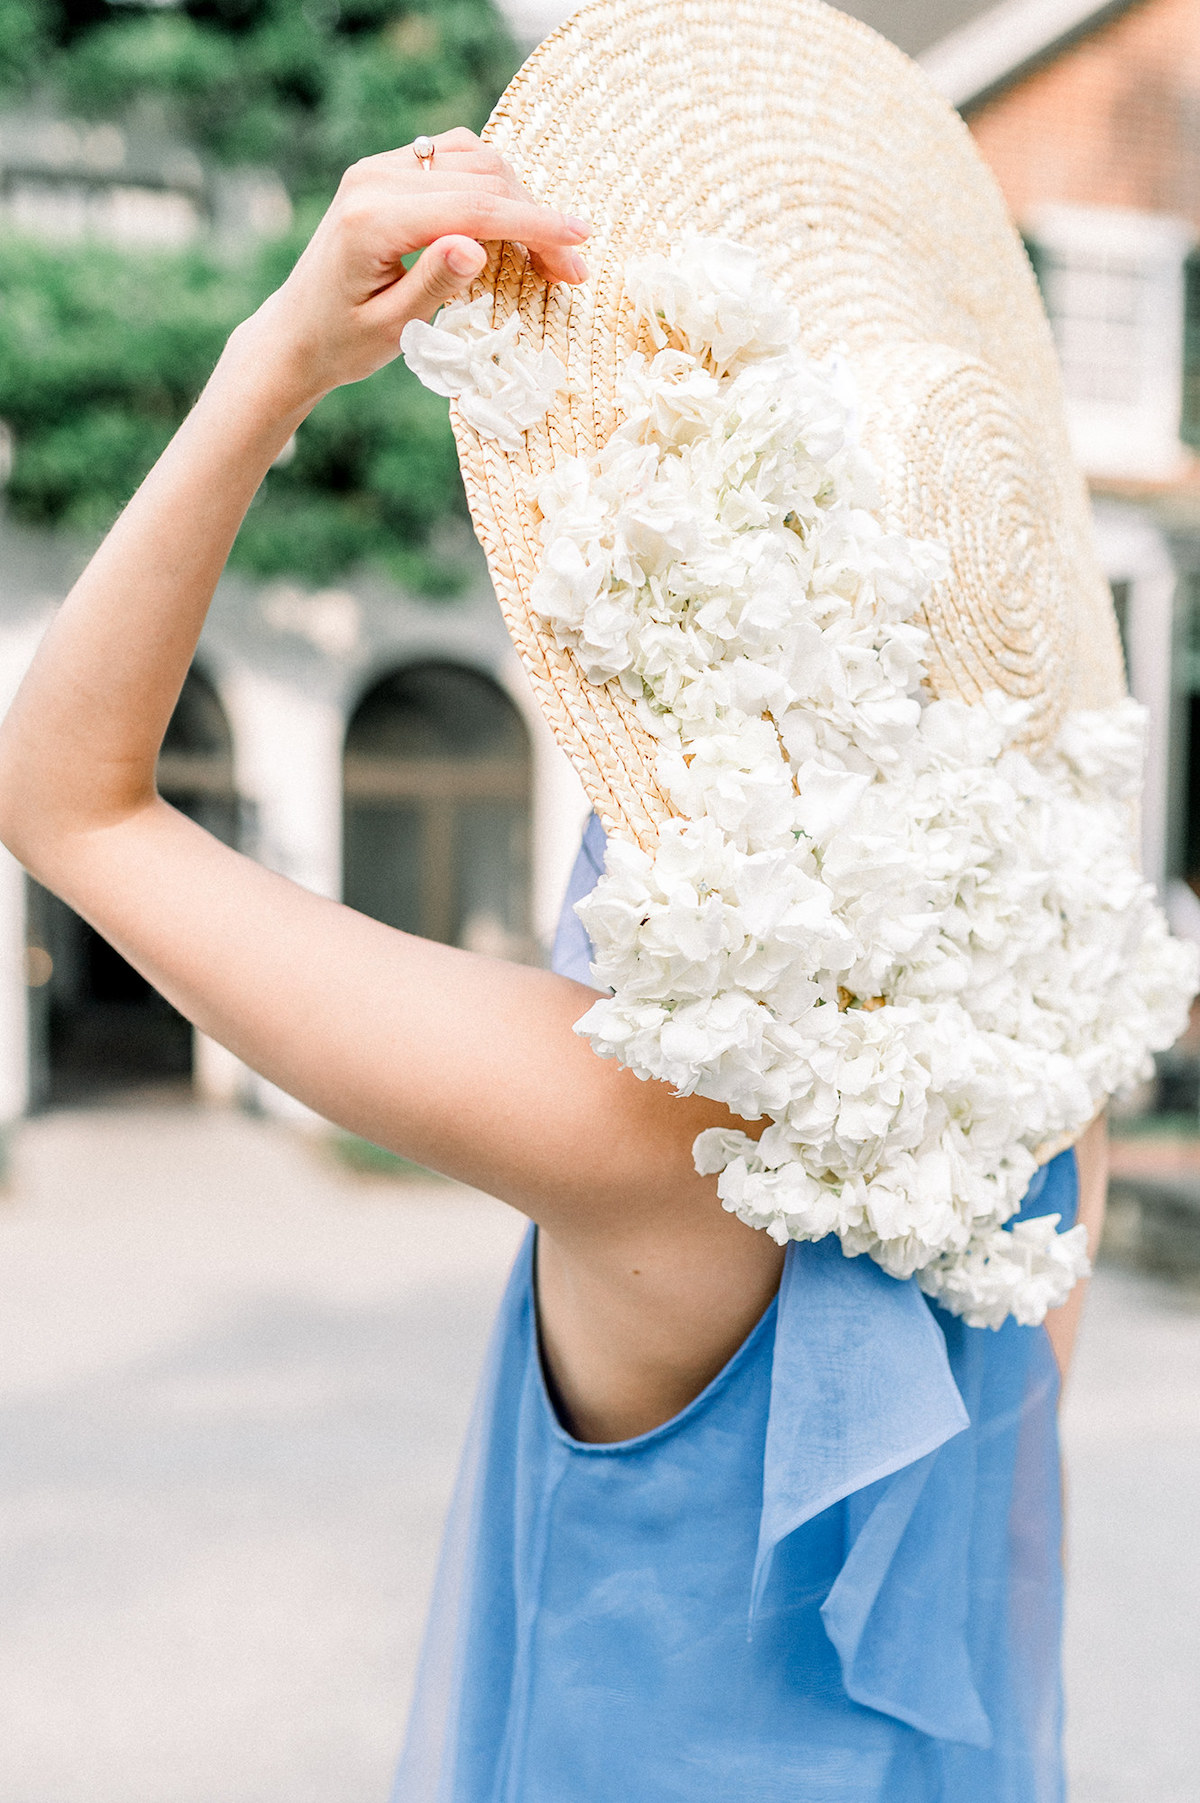 A picturesque moment captured as Bride, donning the Anthropologie French blue gown and a boat-style hat with white hydrangeas, strikes a pose against the backdrop of a historic house at Longwood Gardens.